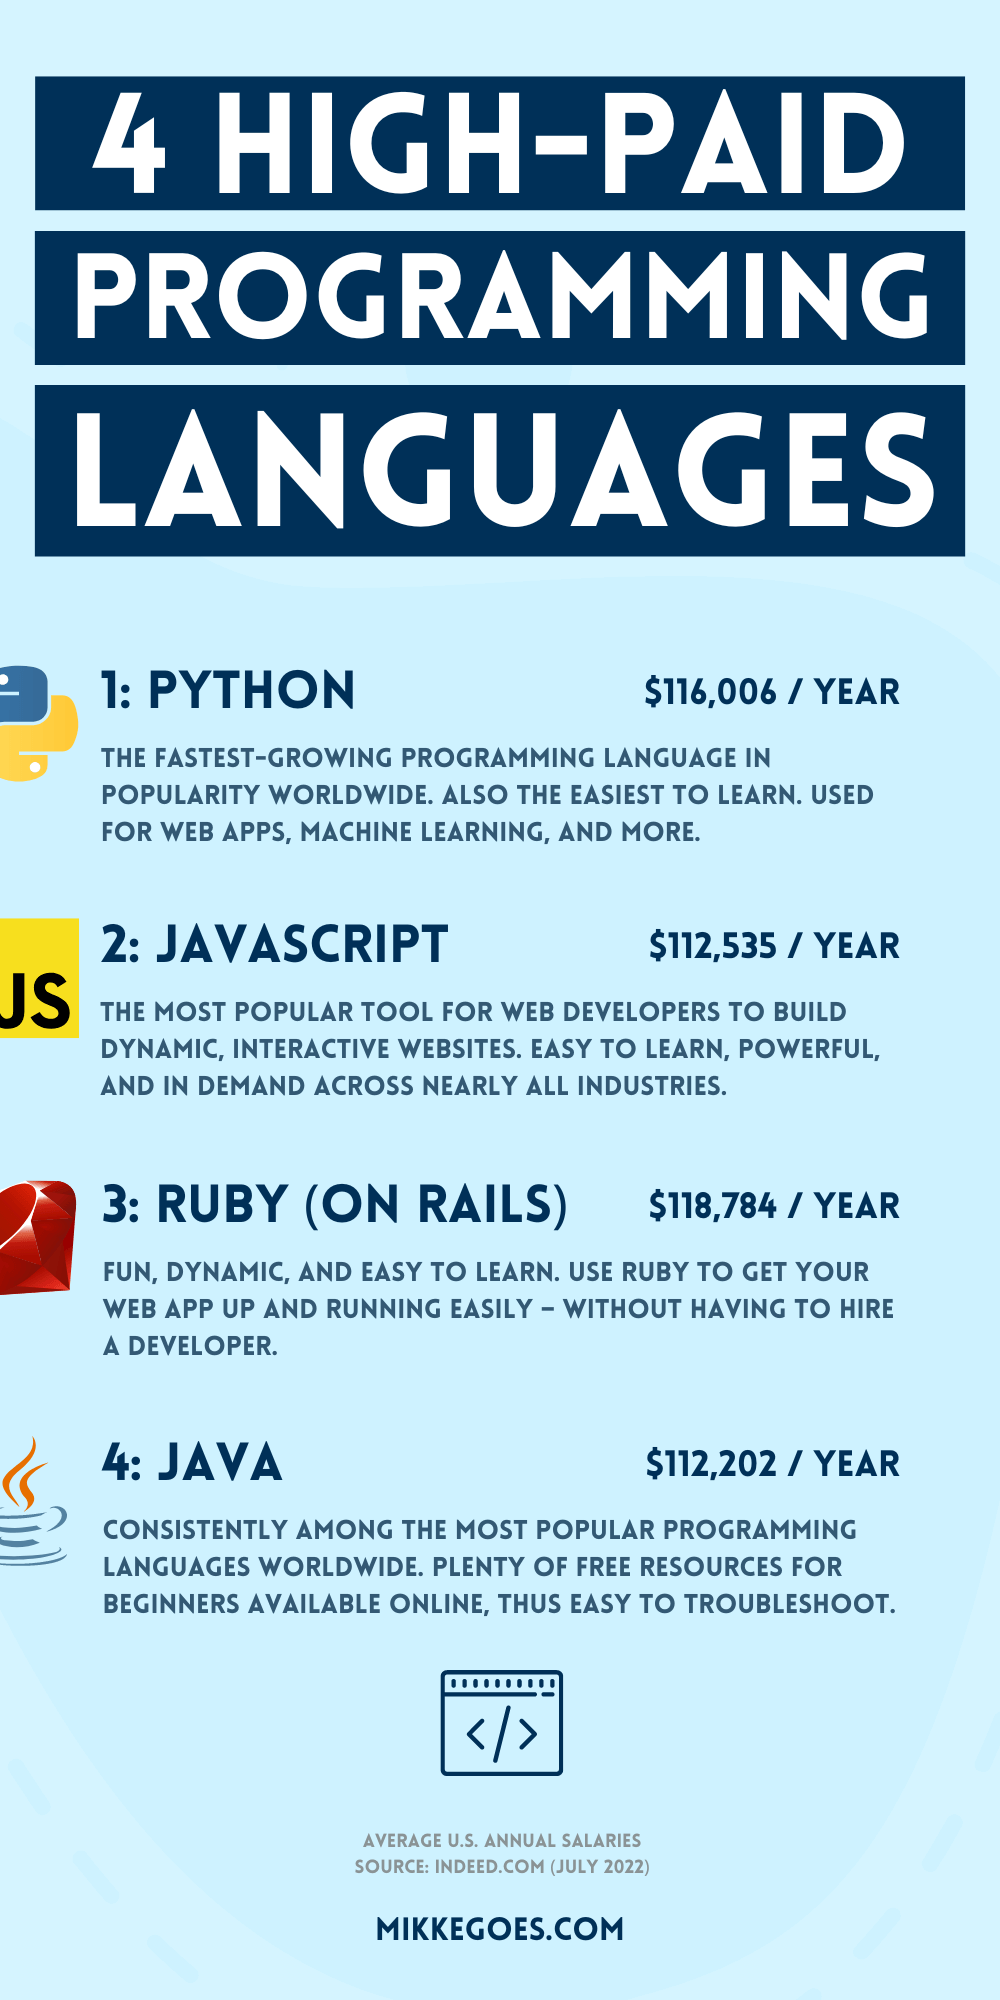 4 high-paid programming languages for beginners – Learn to code and start a career in tech